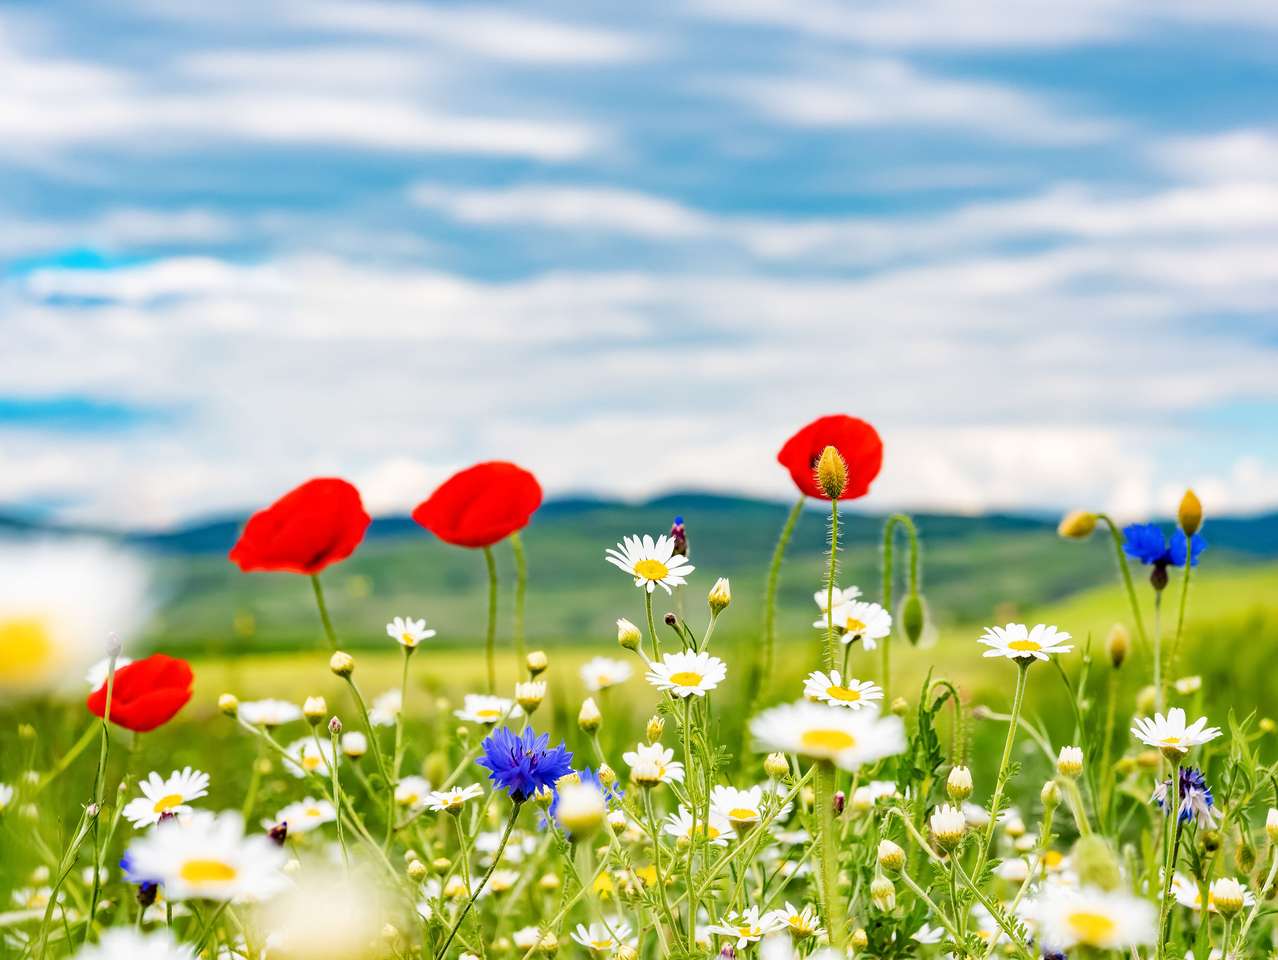 Meadow with wild flowers jigsaw puzzle online